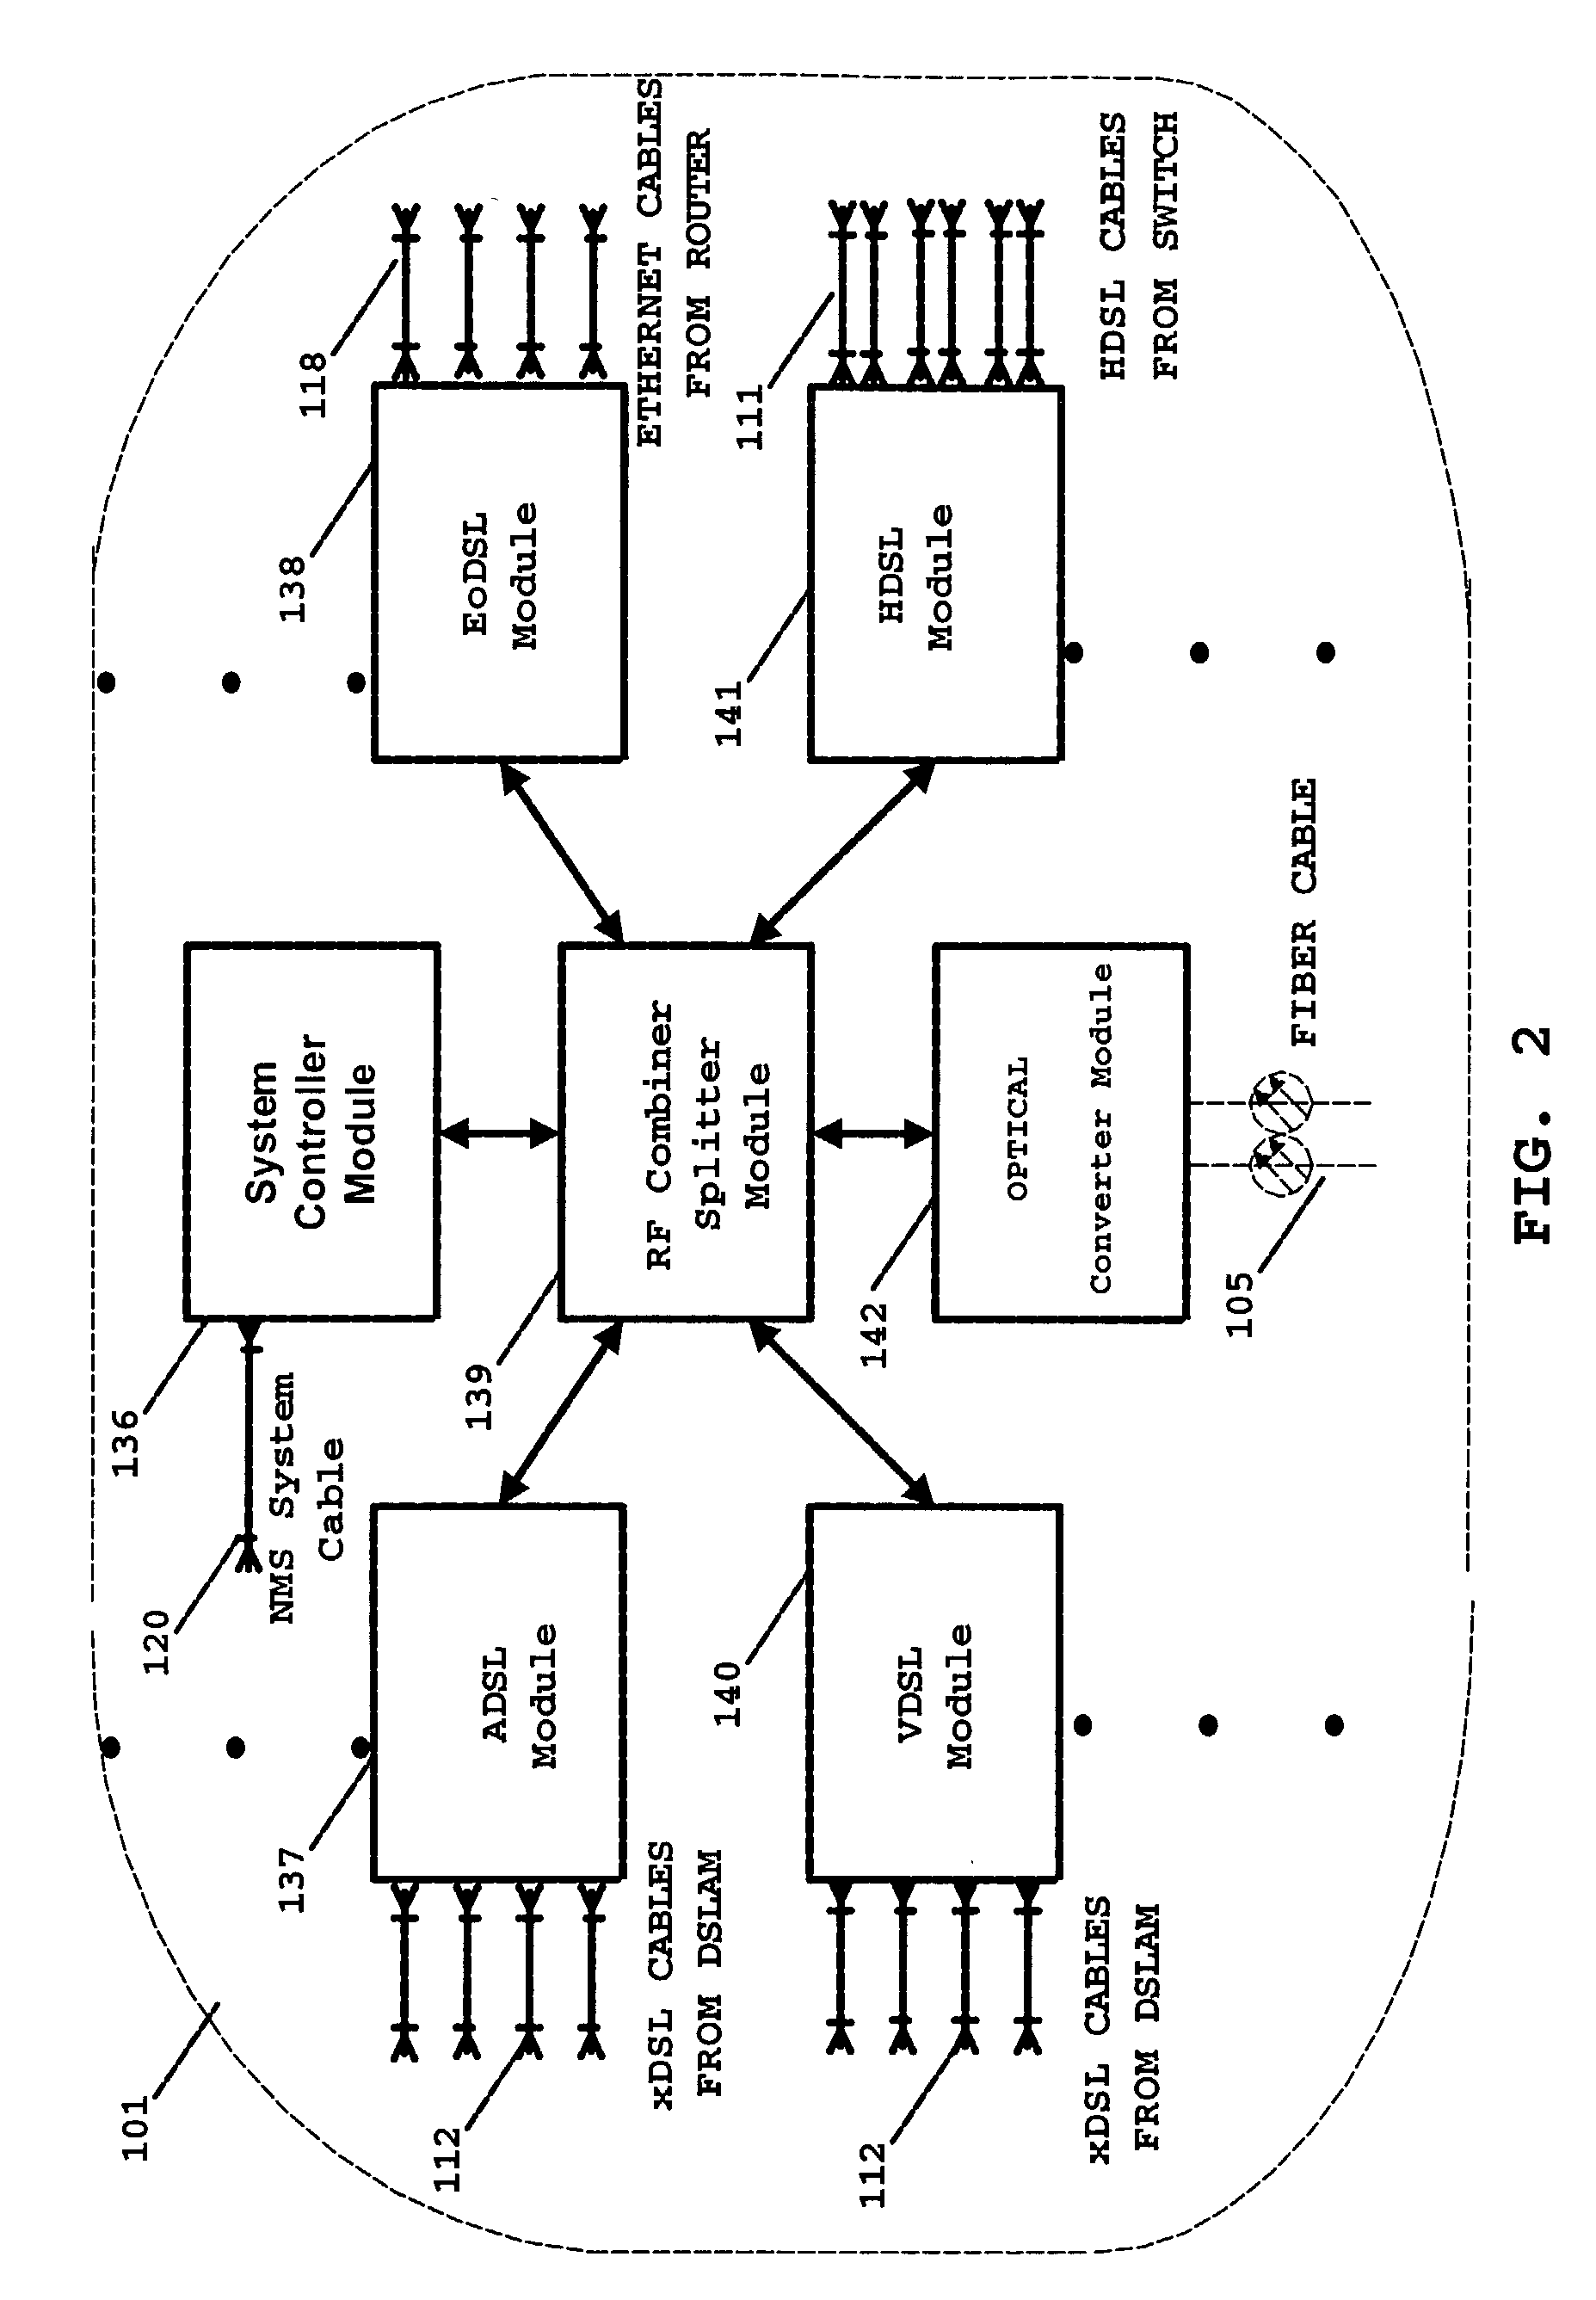 Network architecture and system for delivering bi-directional xDSL based services